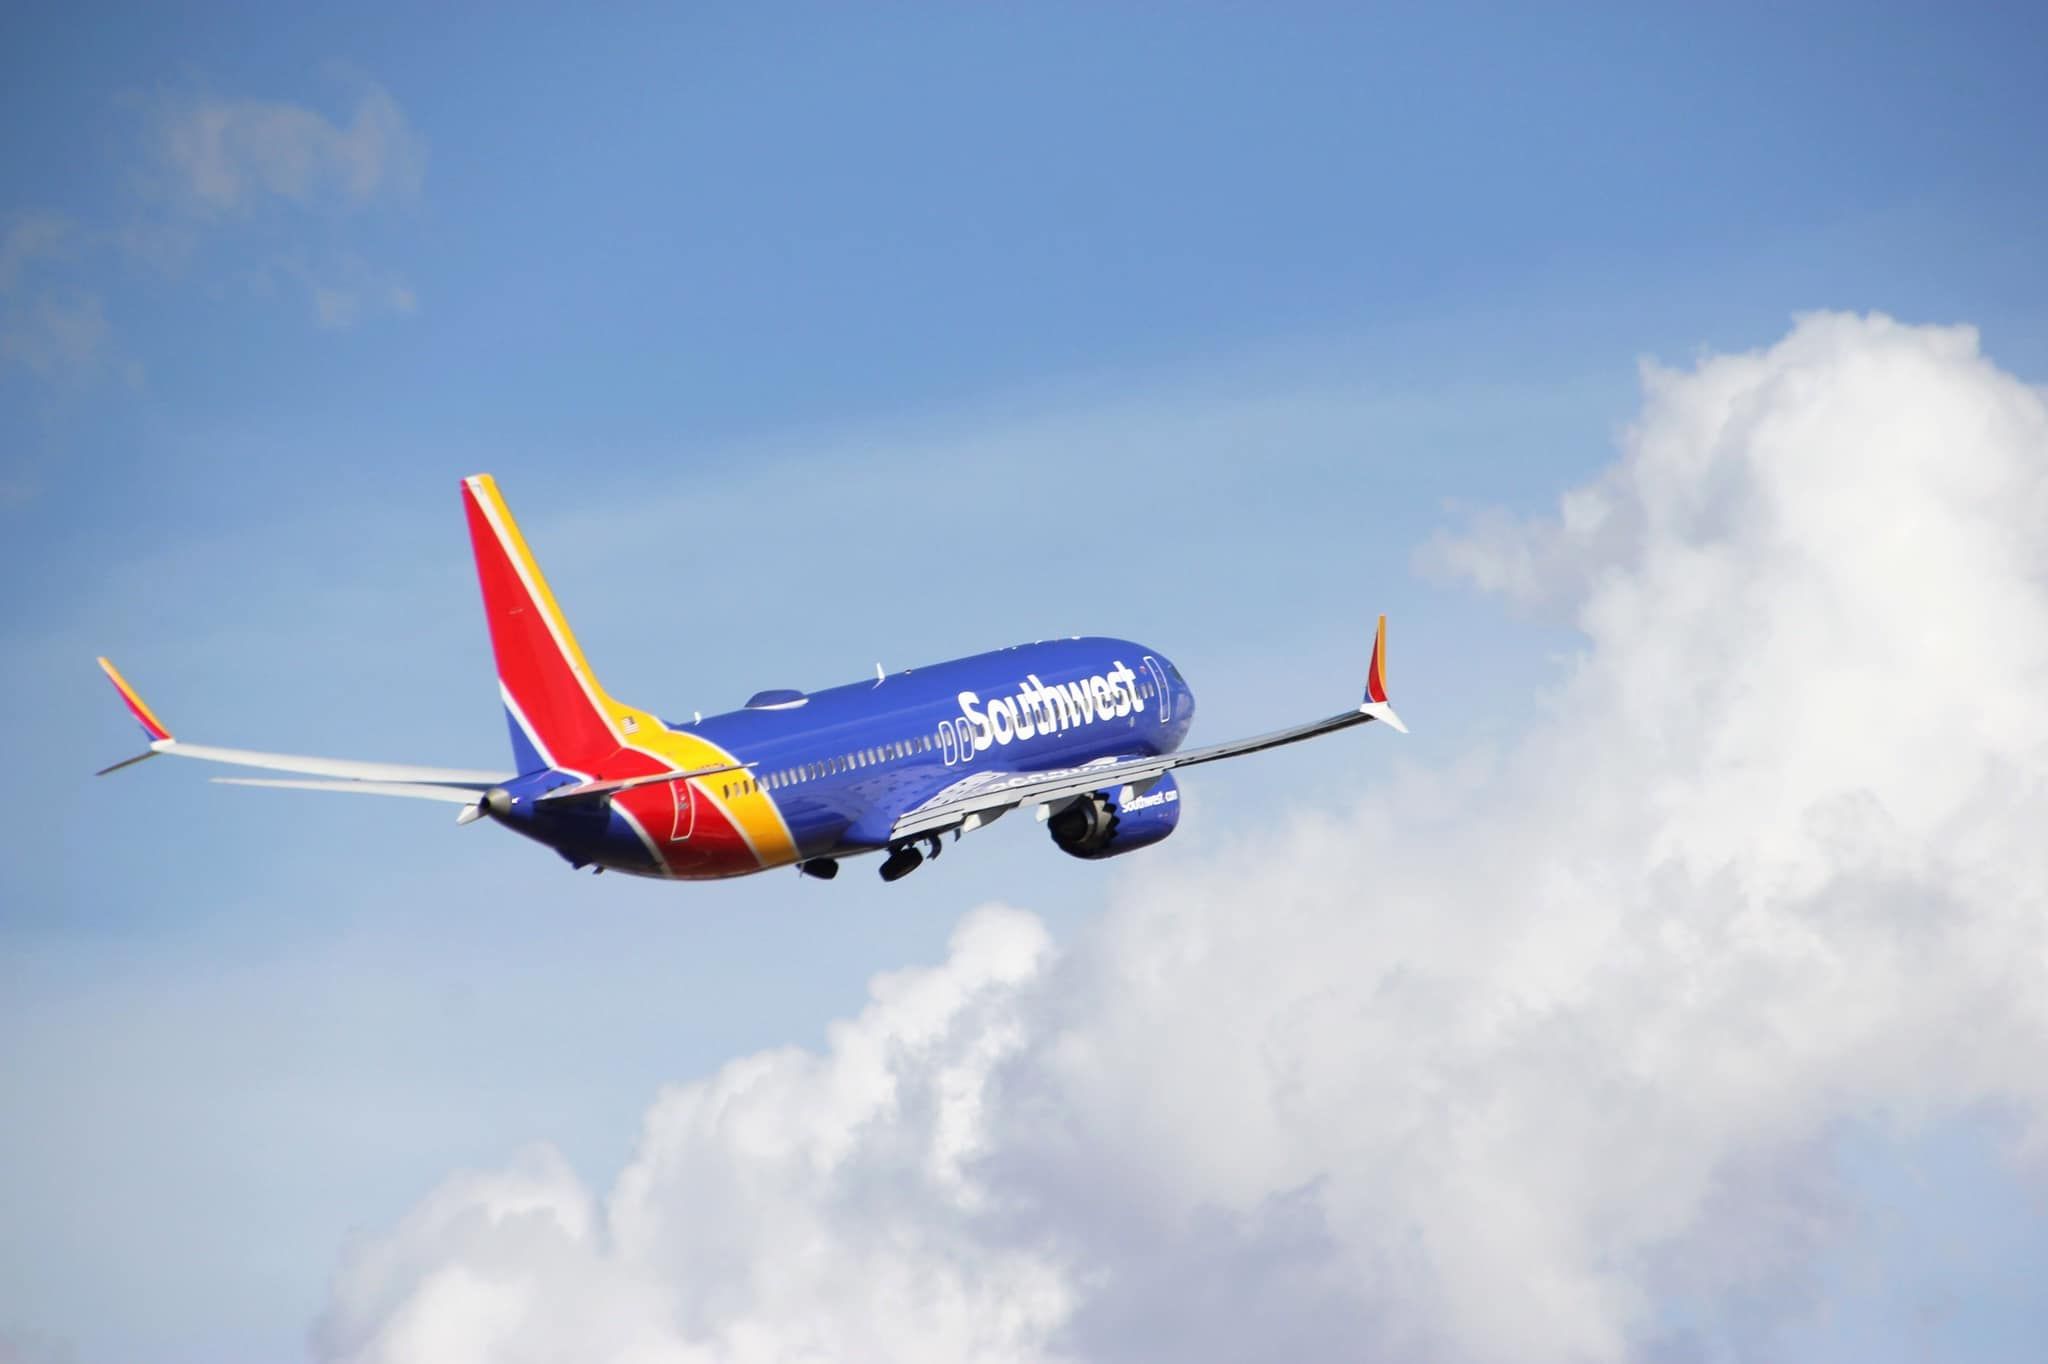 Southwest Airlines Boeing 737 MAX 8 taking off from San Antonio International Airport.